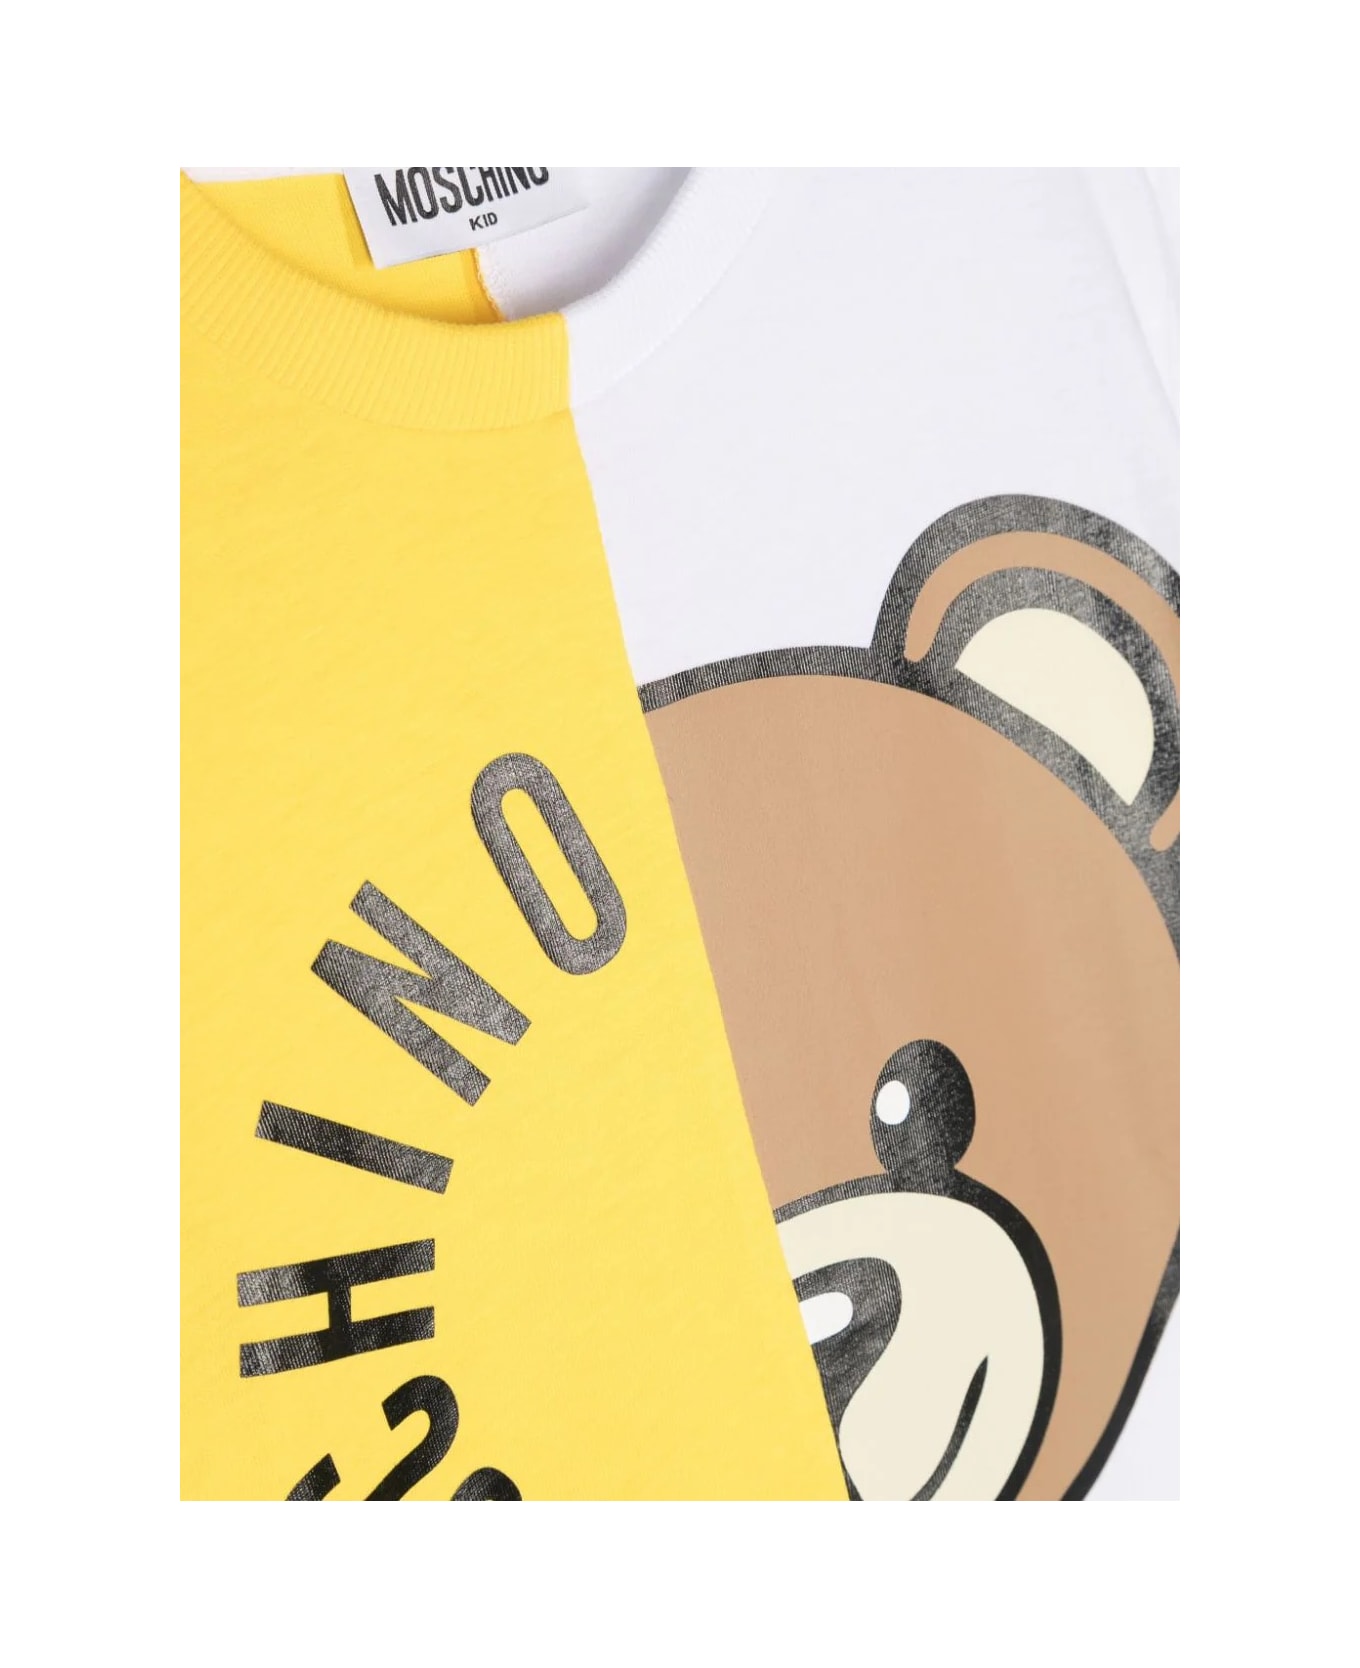 Moschino White And Yellow T-shirt With Moschino Teddy Bear Circular Print - WHITE/YELLOW Tシャツ＆ポロシャツ